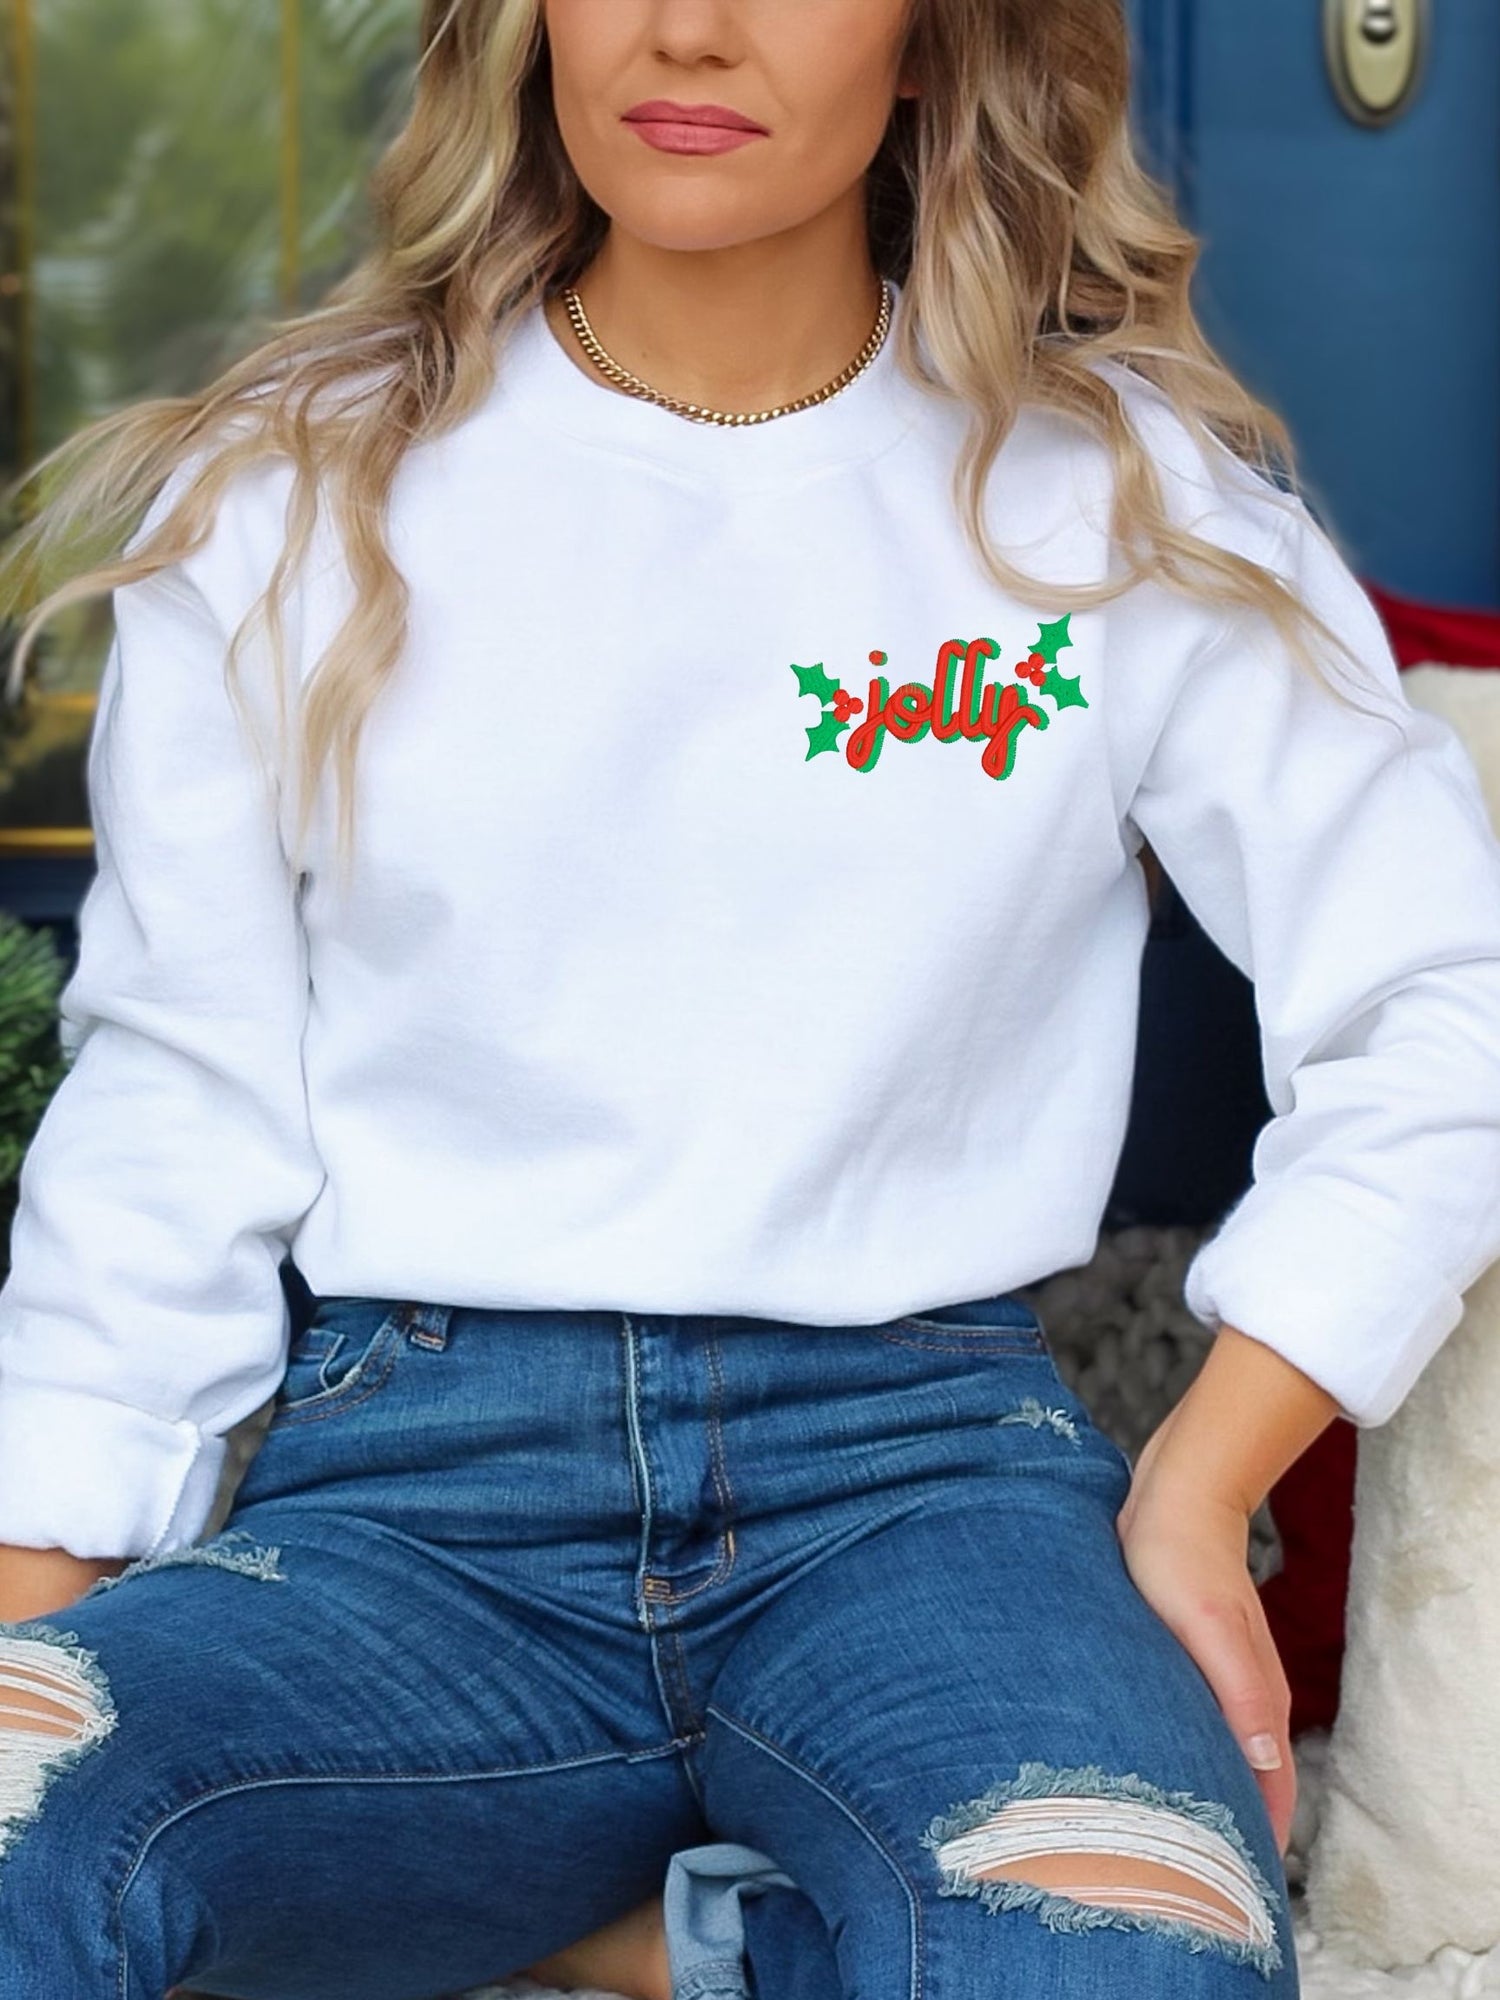 Winnie The Pooh Drip Embroidered Sweatshirt - Jolly Family Gifts